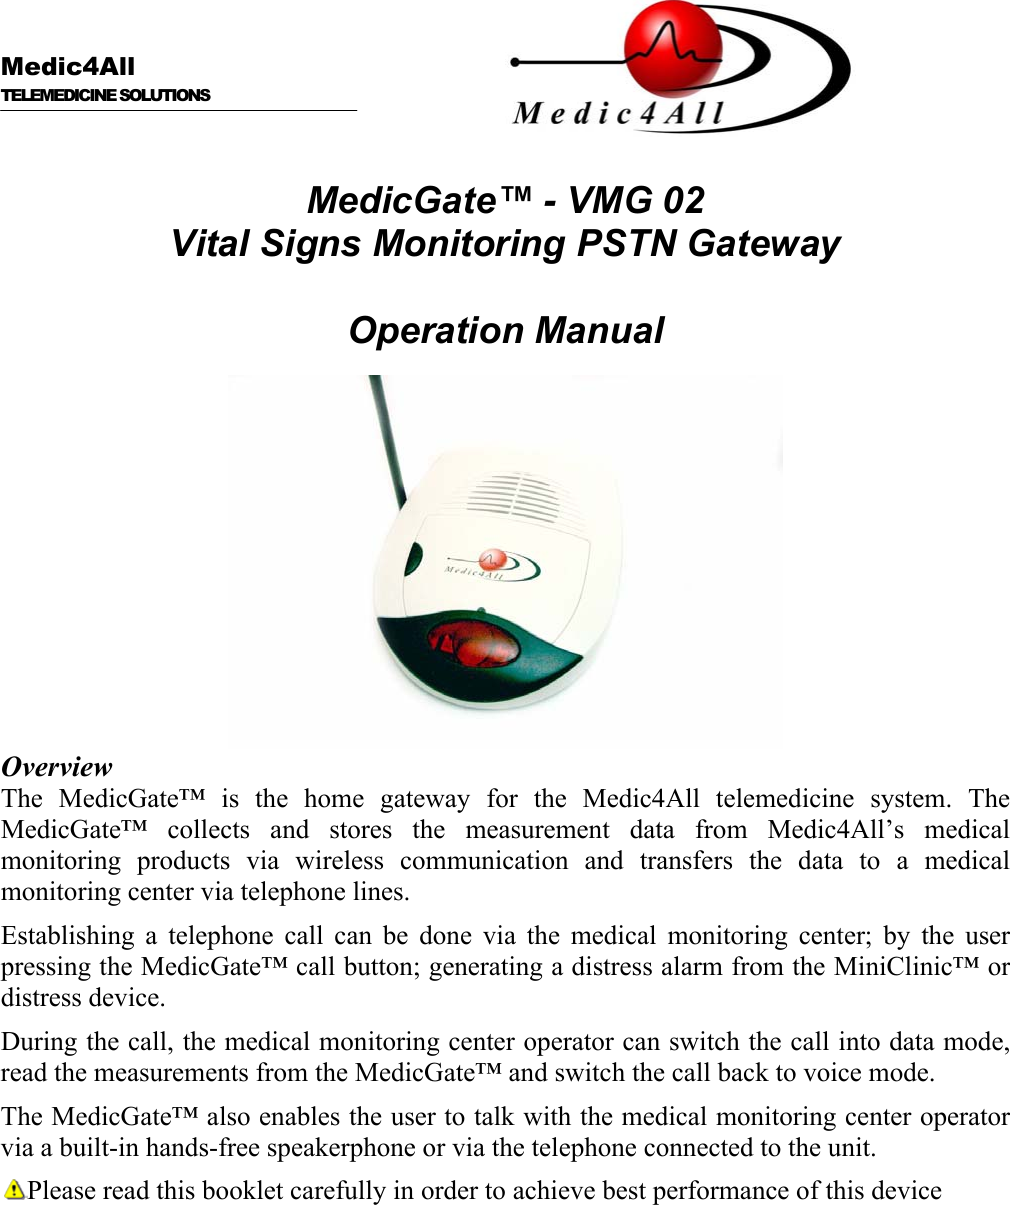      Medic4All  TELEMEDICINE SOLUTIONS   MedicGate™ - VMG 02 Vital Signs Monitoring PSTN Gateway  Operation Manual   Overview The MedicGate™ is the home gateway for the Medic4All telemedicine system. The MedicGate™ collects and stores the measurement data from Medic4All’s medical monitoring products via wireless communication and transfers the data to a medical monitoring center via telephone lines. Establishing a telephone call can be done via the medical monitoring center; by the user pressing the MedicGate™ call button; generating a distress alarm from the MiniClinic™ or distress device. During the call, the medical monitoring center operator can switch the call into data mode, read the measurements from the MedicGate™ and switch the call back to voice mode. The MedicGate™ also enables the user to talk with the medical monitoring center operator via a built-in hands-free speakerphone or via the telephone connected to the unit. Please read this booklet carefully in order to achieve best performance of this device 